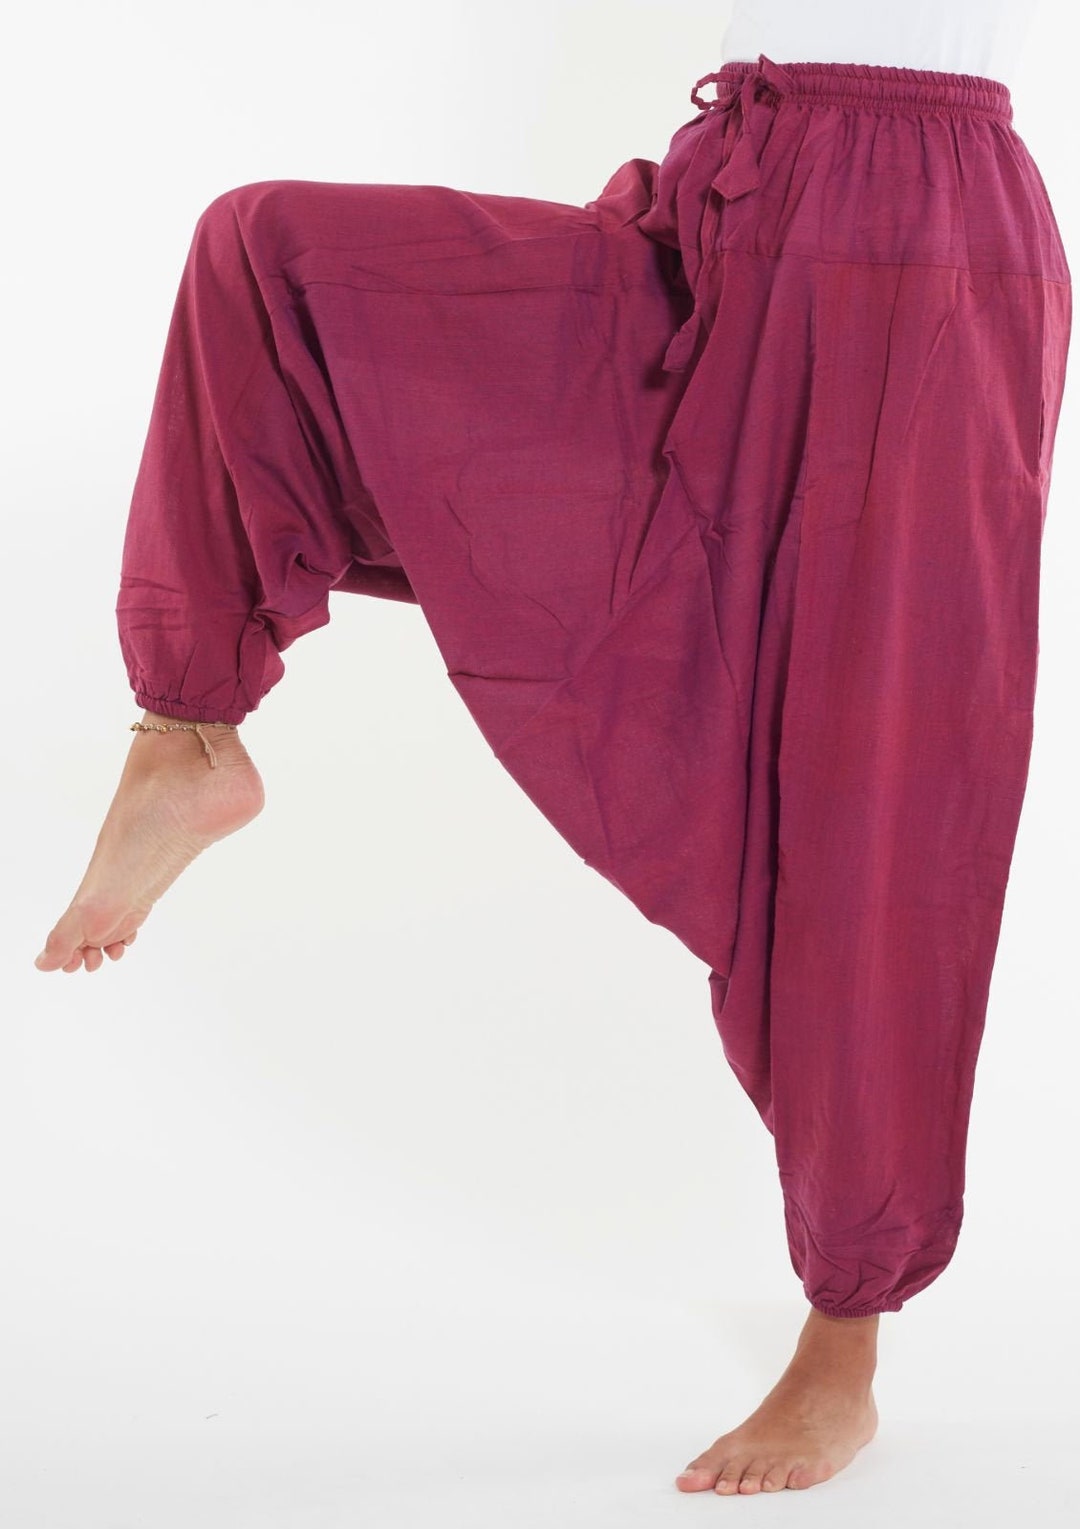 Simple Harem Cotton Pants Perfect for Yoga and Comfy Relax - Etsy